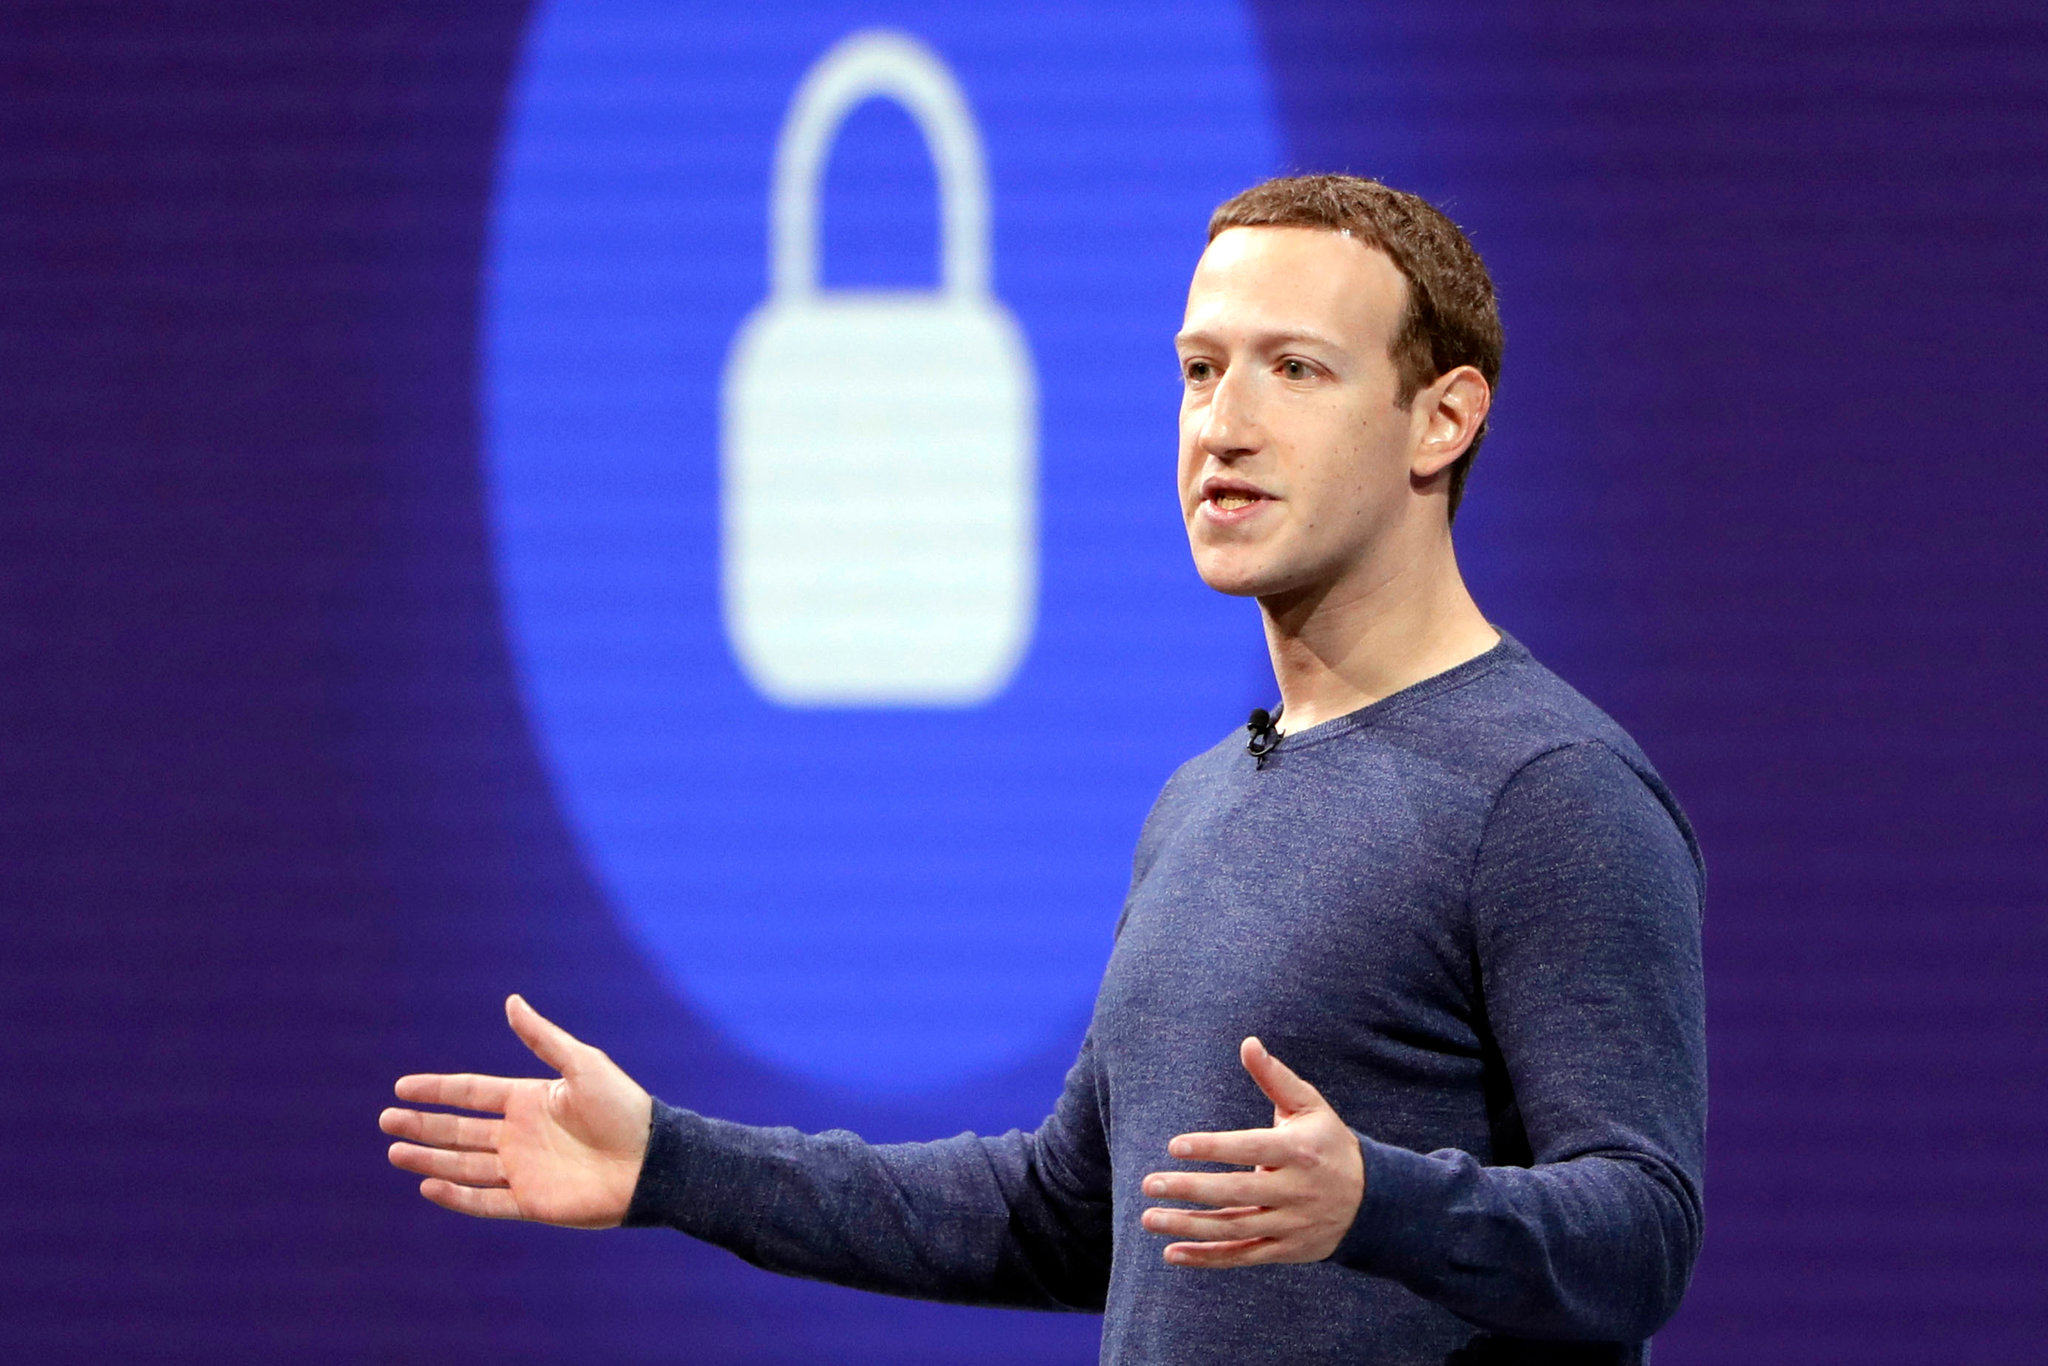 Millions of Facebook Users Are Warned of an Unexpected Messenger Update by Mark Zuckerberg